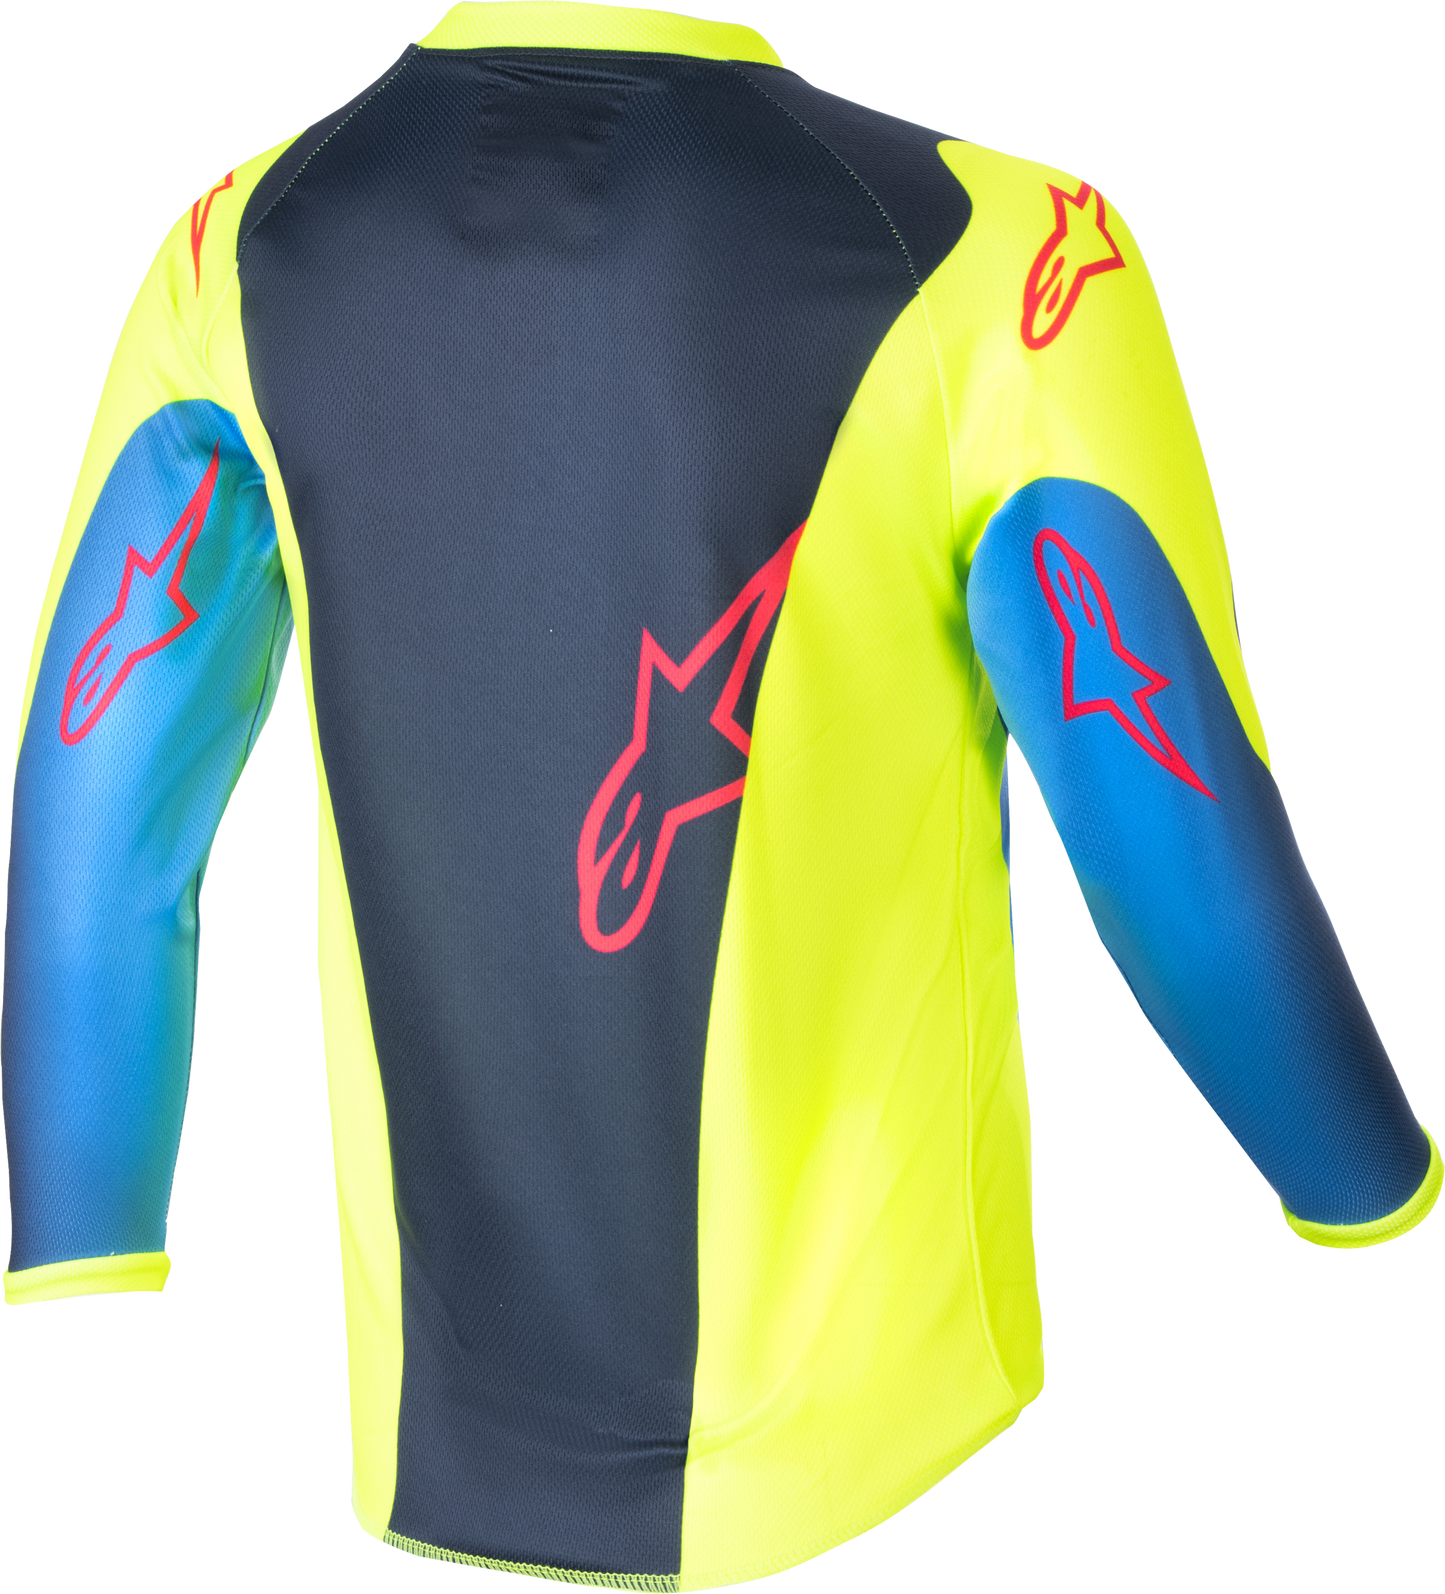 KIDS RACER - GRAPHIC 1 JERSEY YLW FLUO/BLUE/NT NAVY